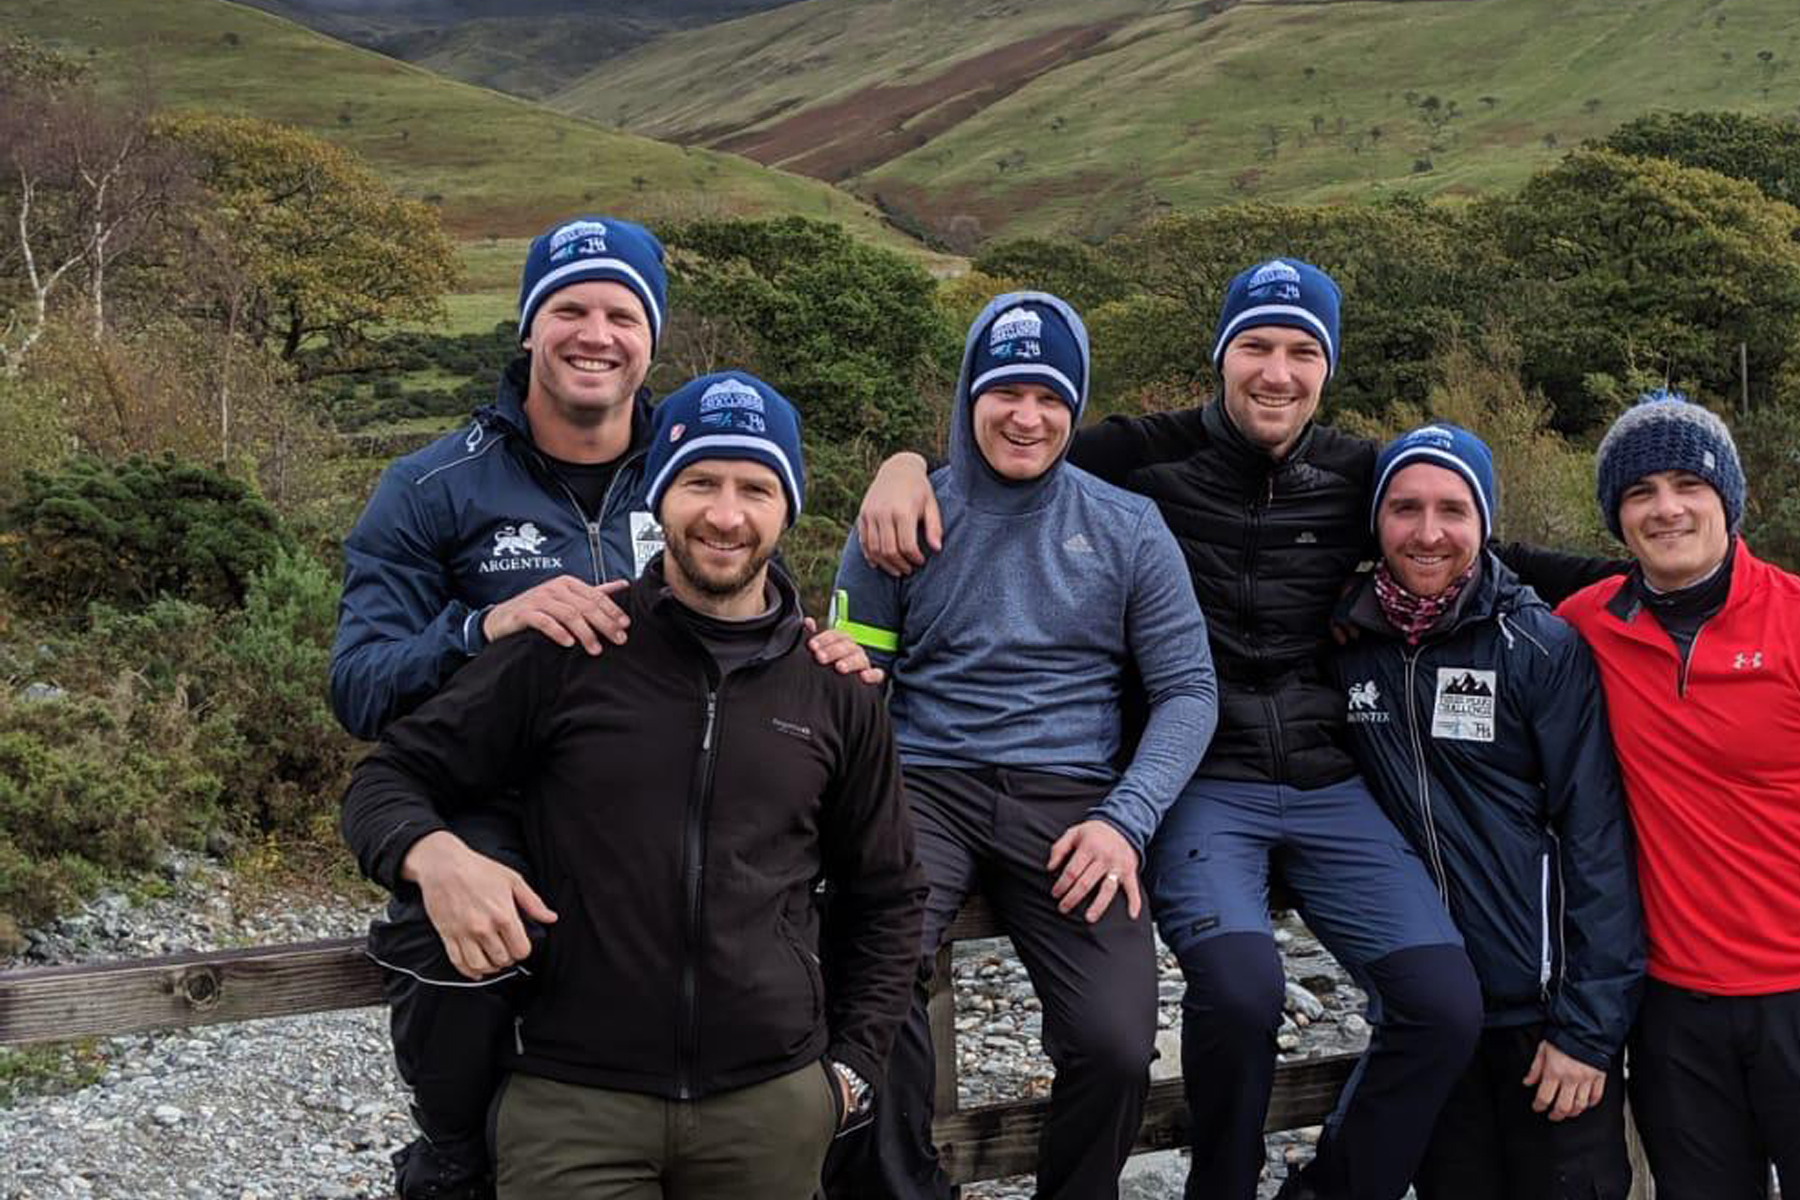 Three Peaks Challenge conquered for cricket charities